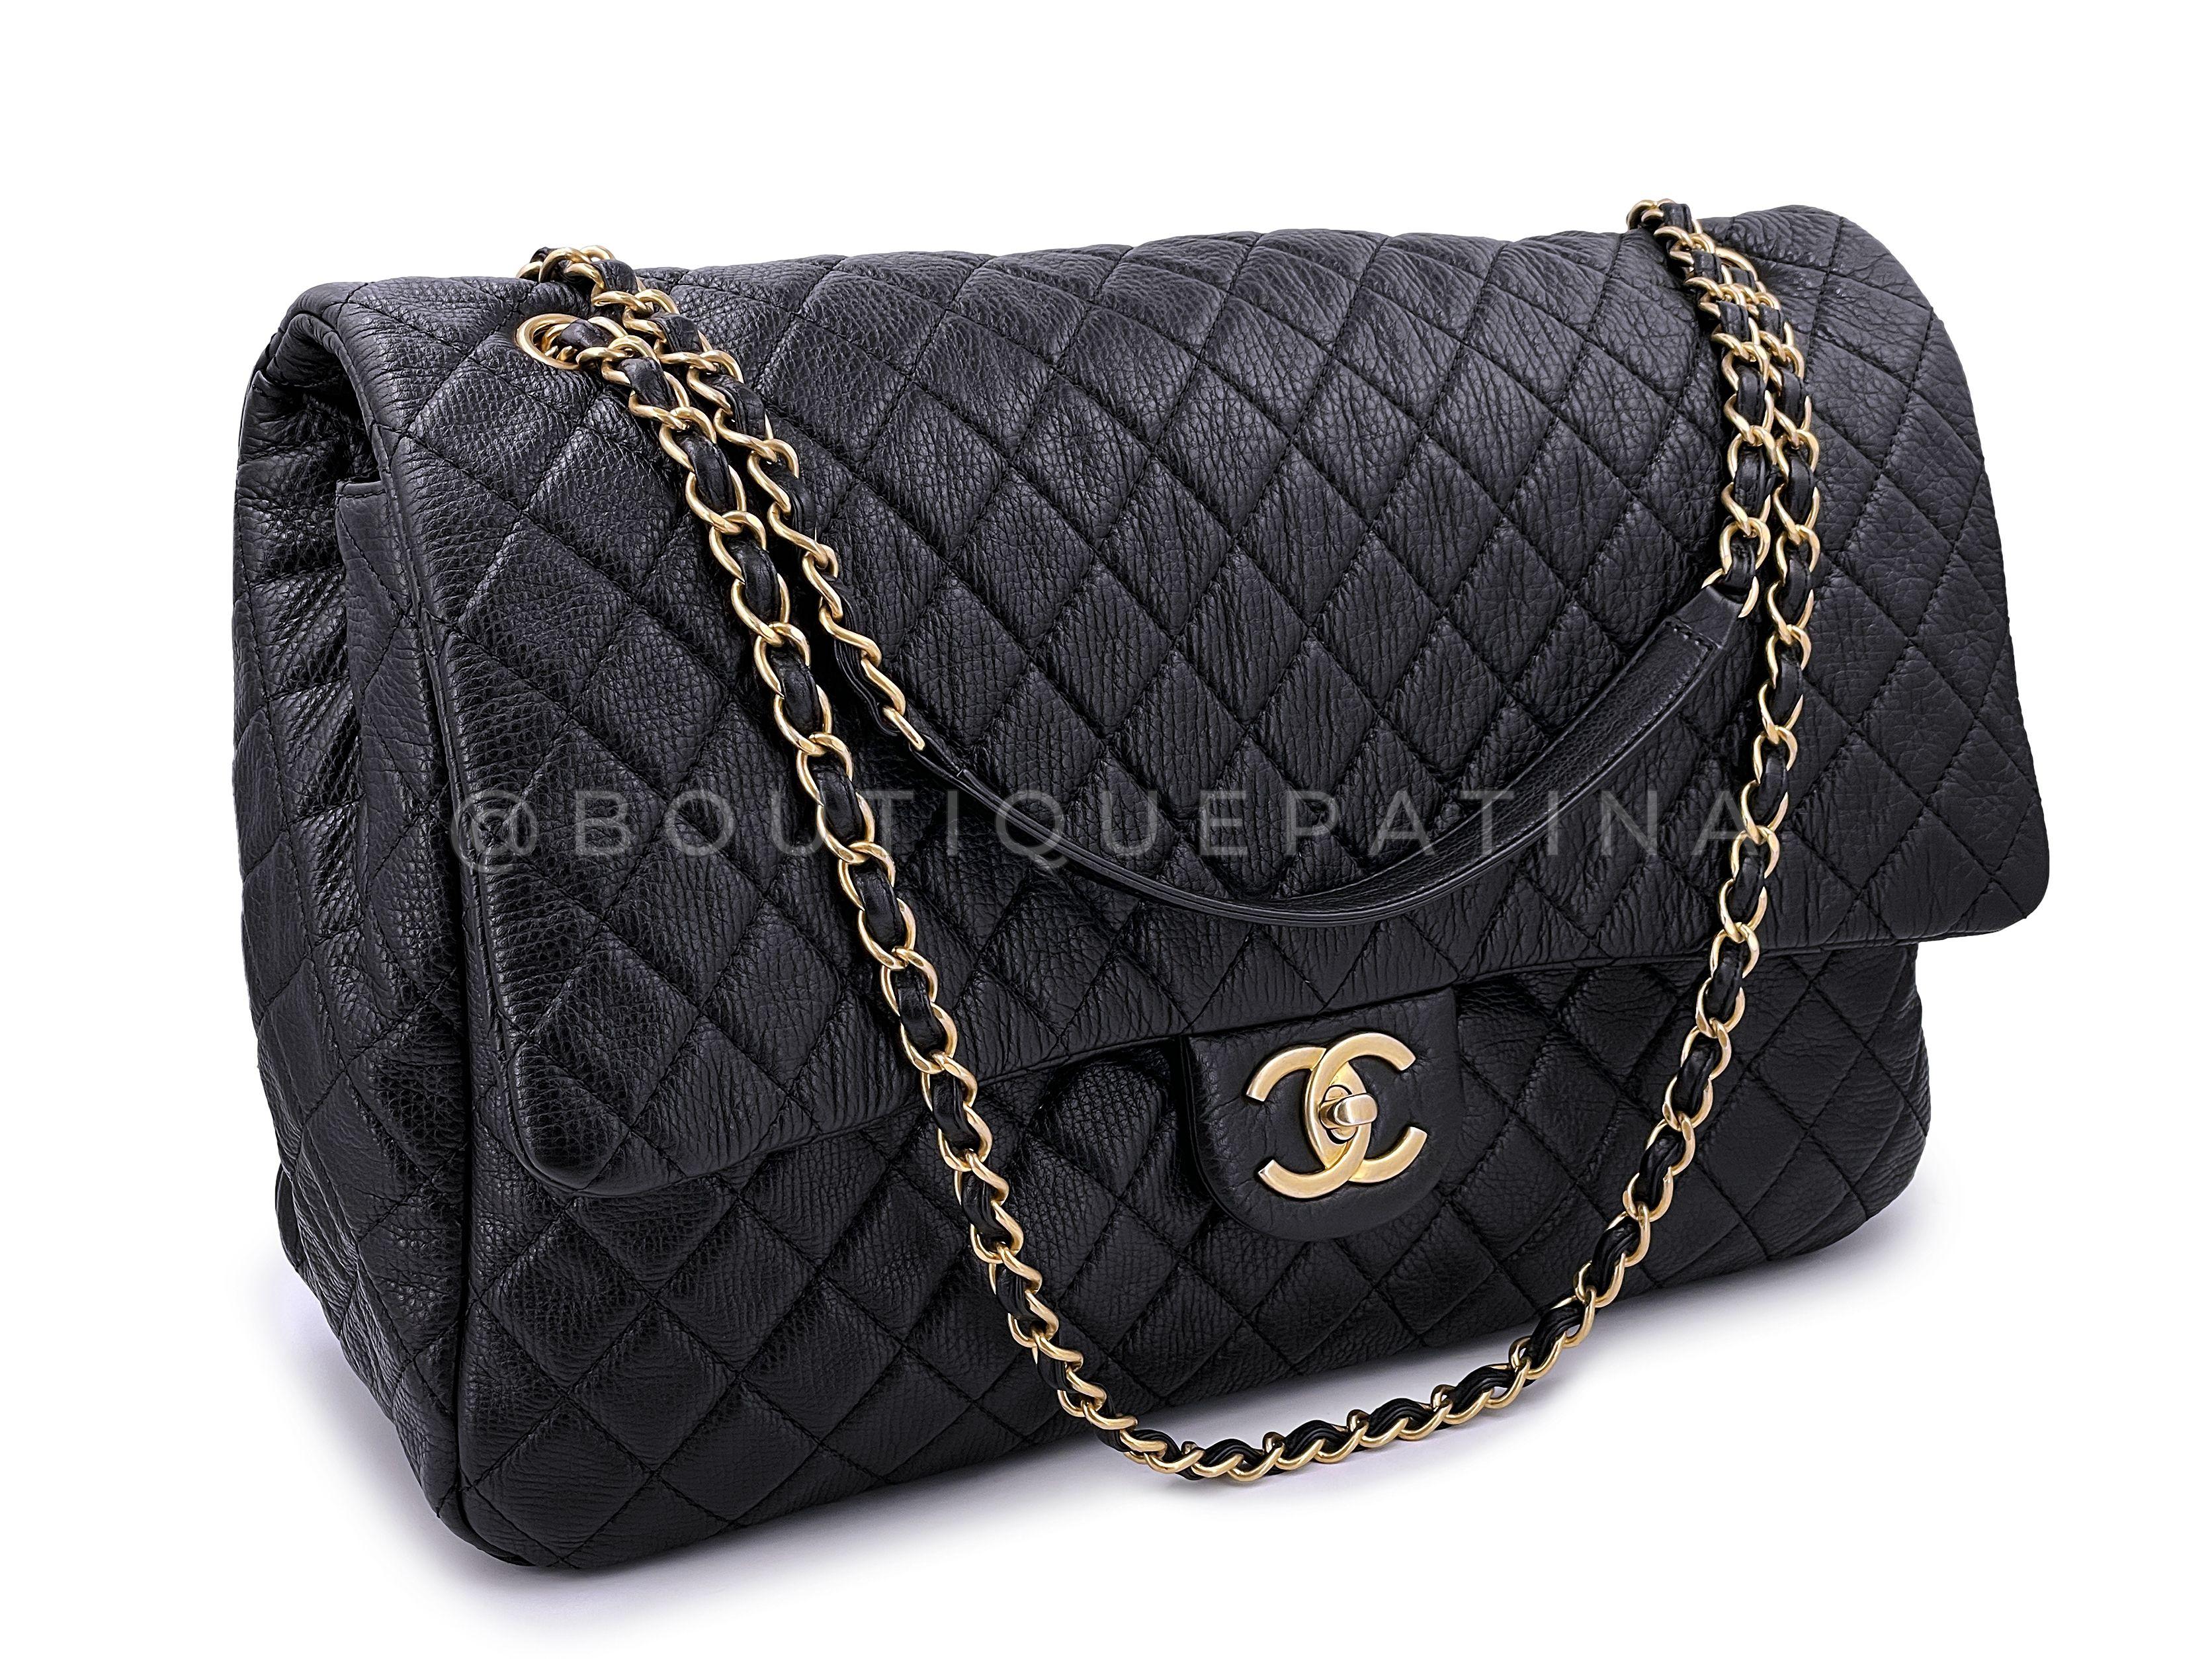 Chanel Xxl Airline Bag - 4 For Sale on 1stDibs